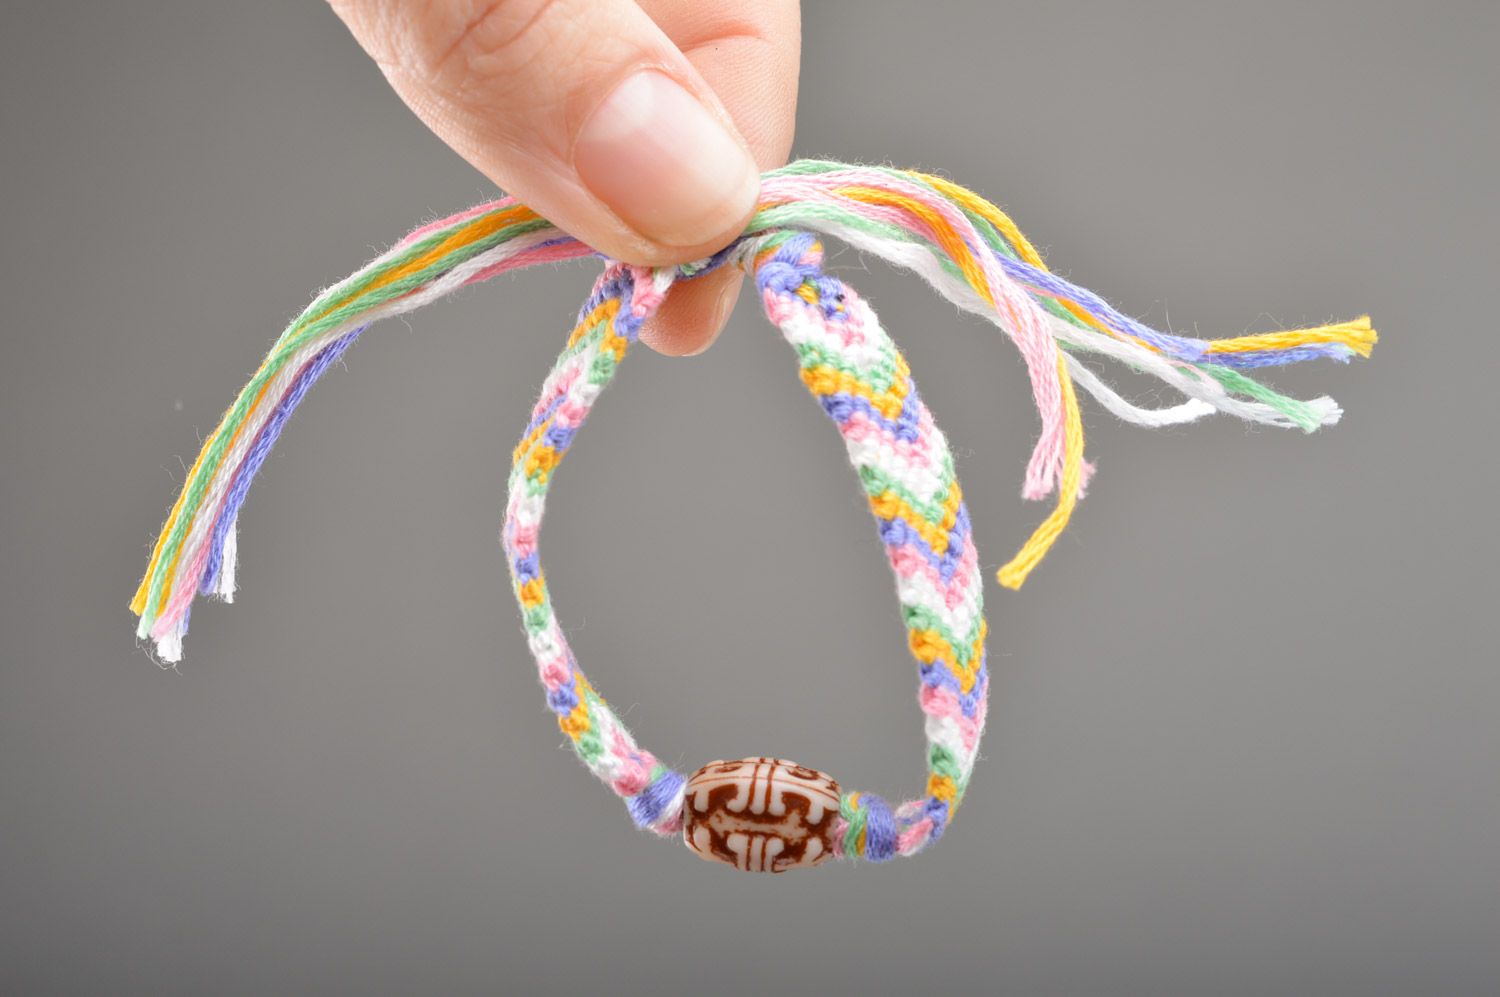 Simple handmade friendship bracelet woven of colorful embroidery floss with beads photo 3